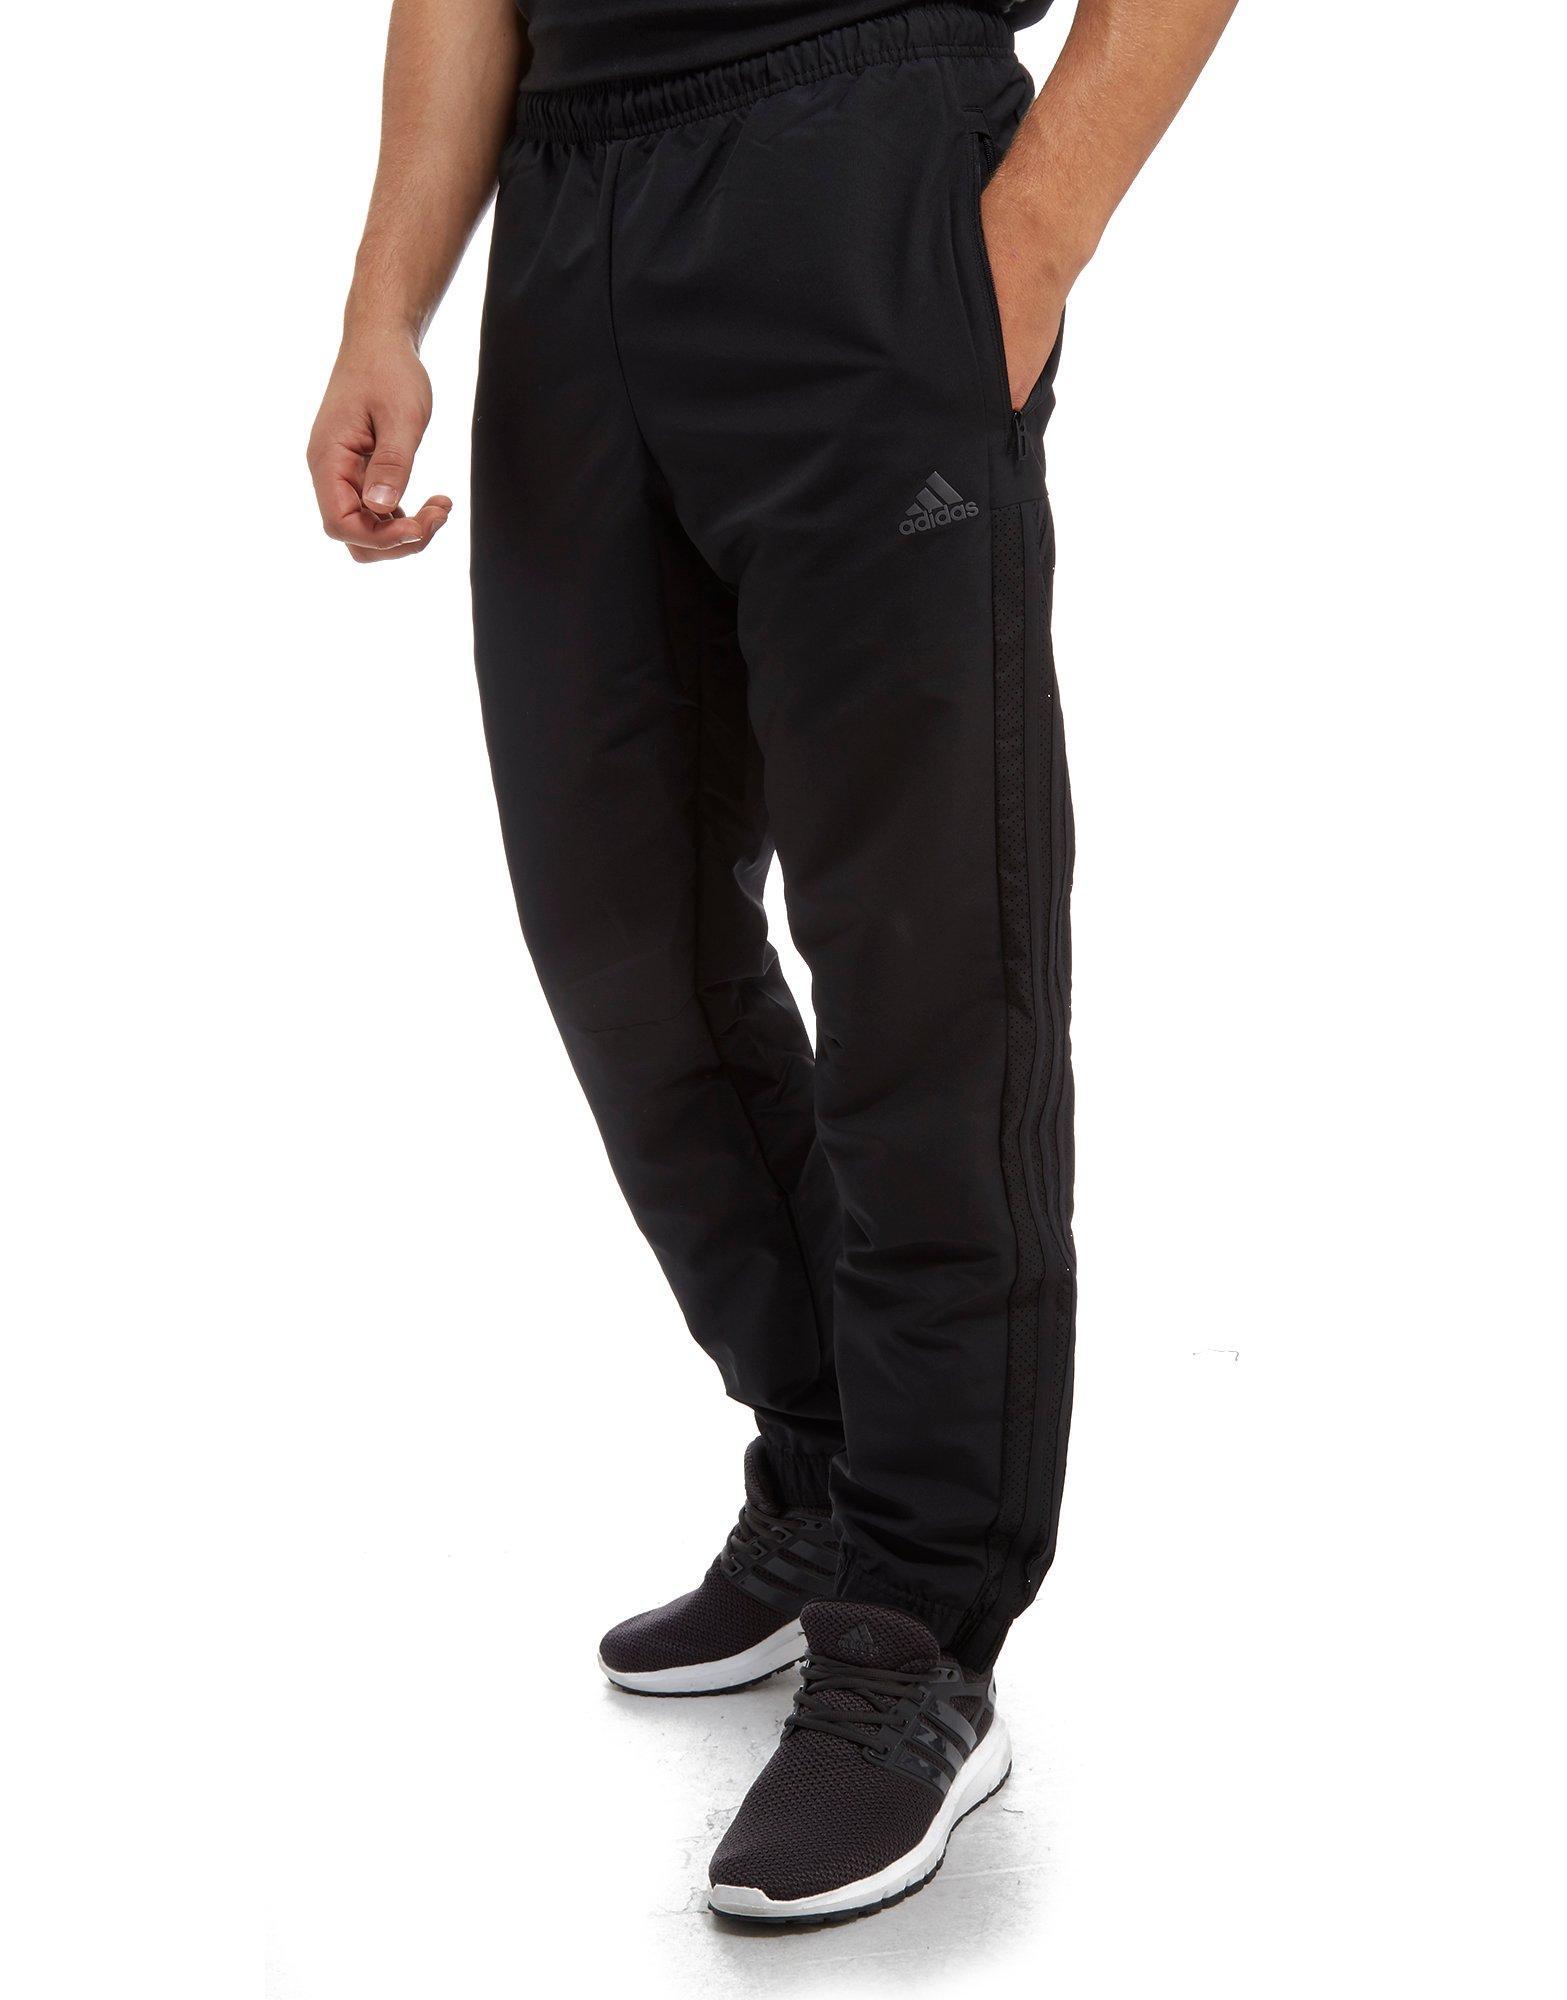 Lyst - Adidas Woven Cuffed Pants in Black for Men - Save 5%